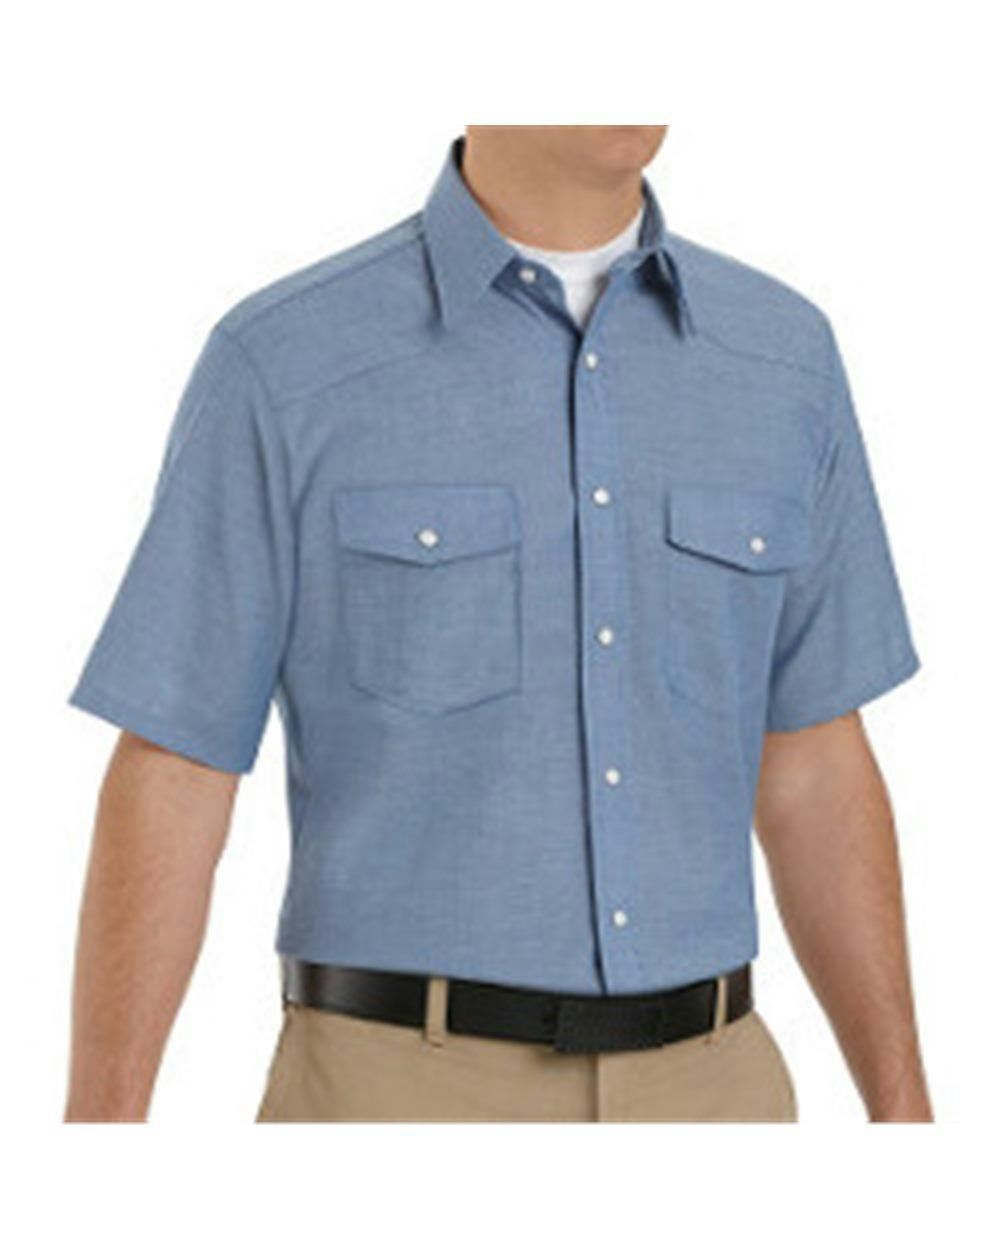 Image for Deluxe Western Style Short Sleeve Shirt - Tall Sizes - SC24T